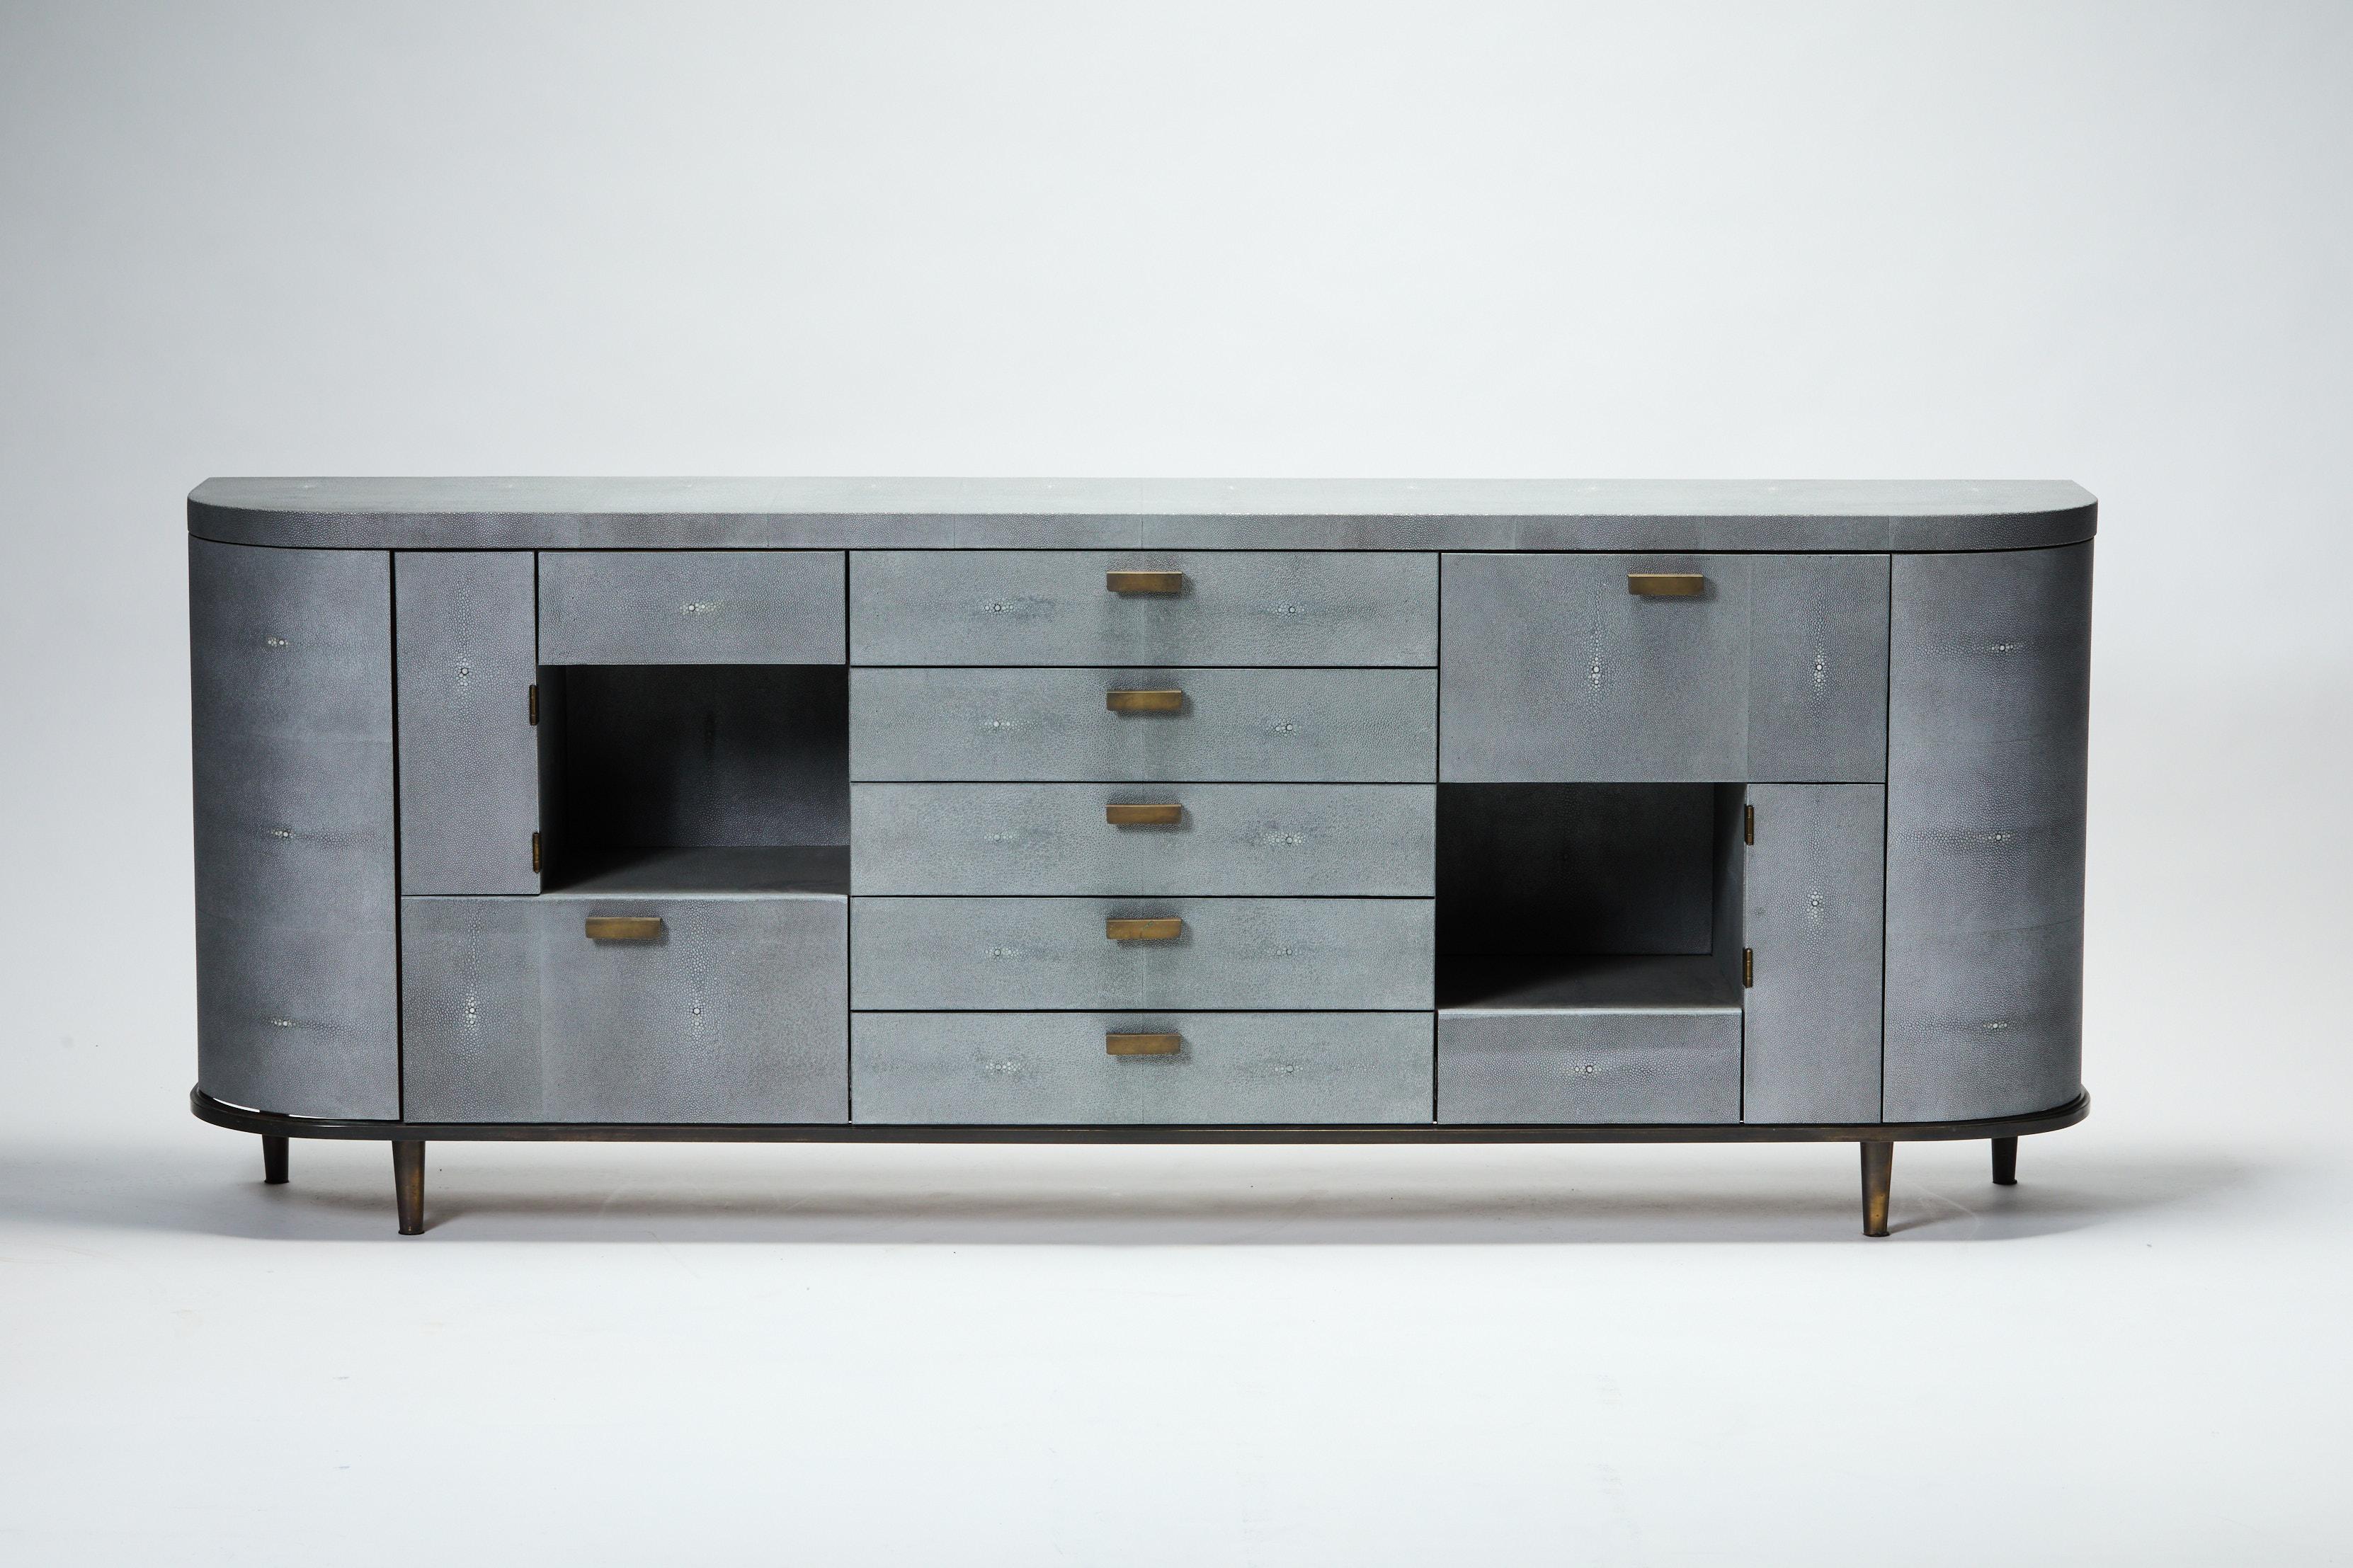 This one-off sideboard is the most majestic piece of our Gallery Collection.
Produced between France and Italy, this furniture joins the great French decoration history with the mastery and use of shagreen. 
It also emphasis the influence and